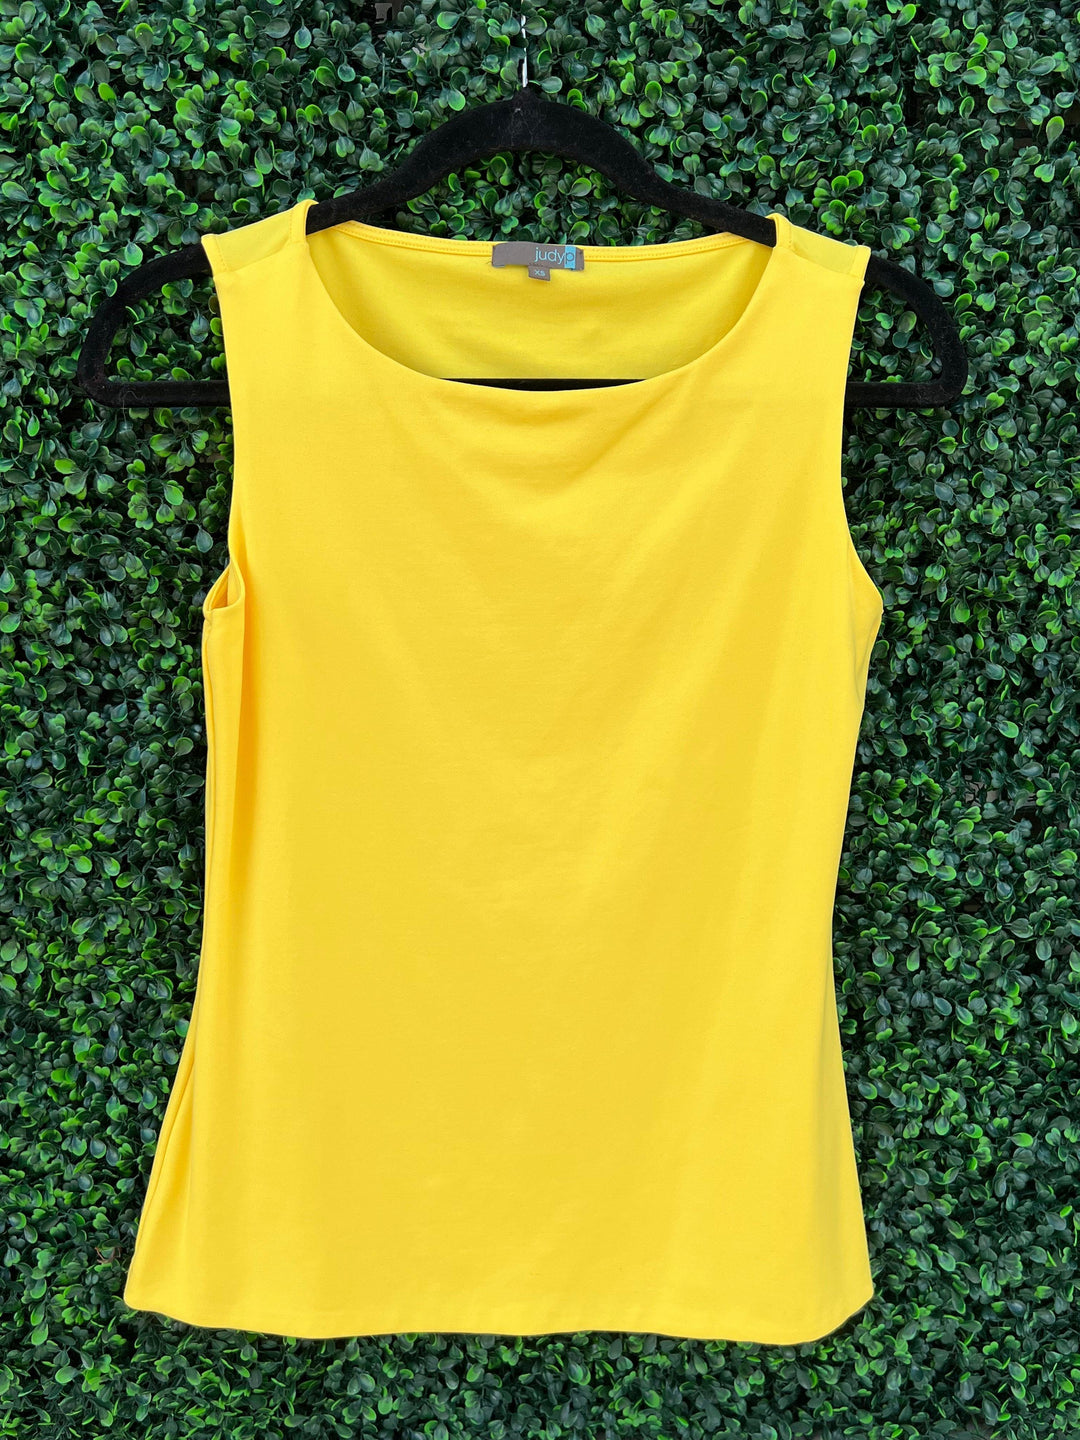 Yellow tank top from online boutique Tres Chic